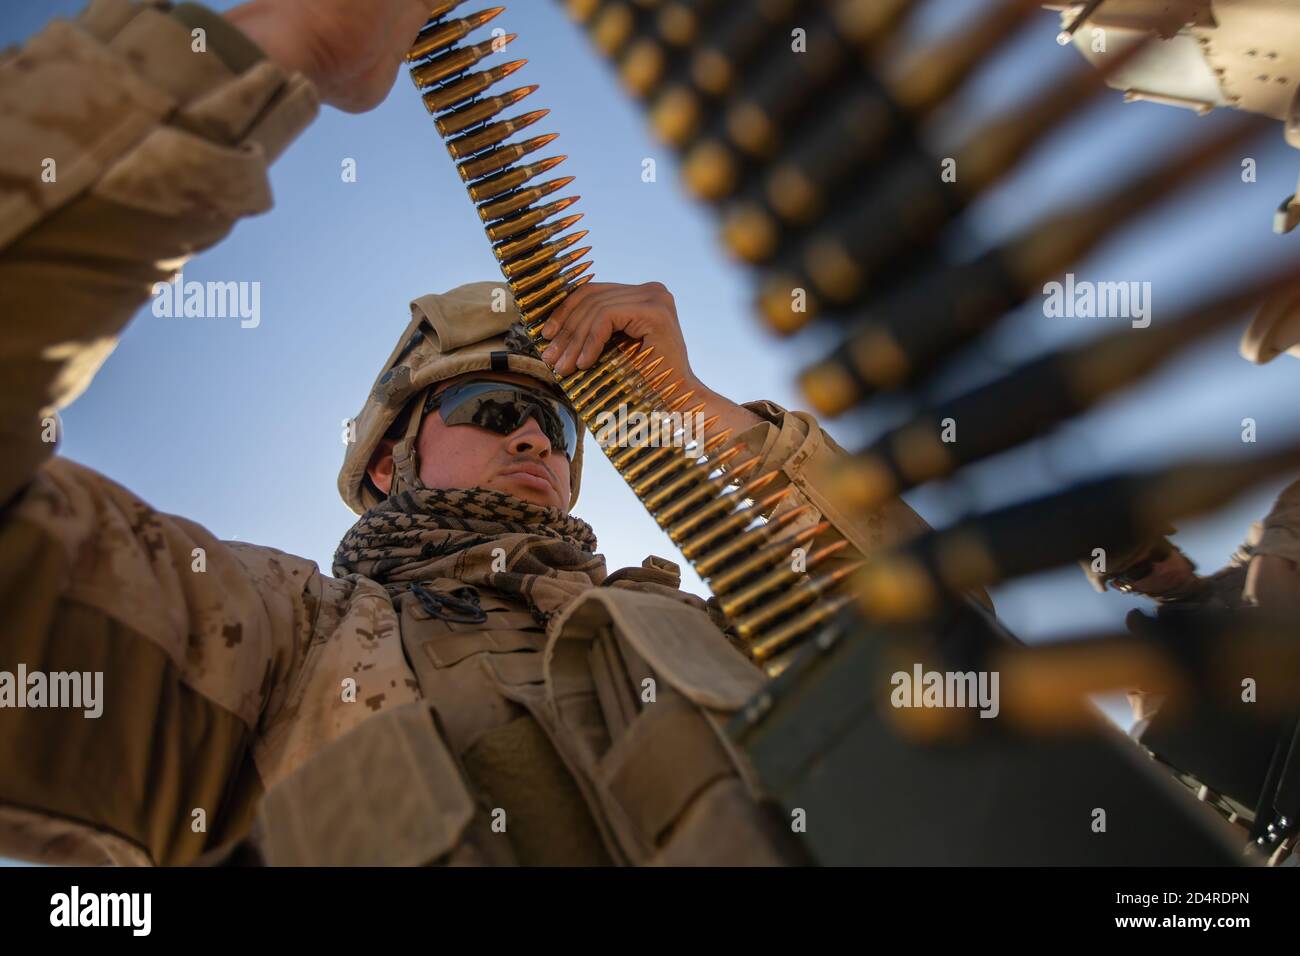 U.S. Marine Corps Lance Cpl. Matthew Martinez with Combat Logistics Battalion 8, Combat Logistics Regiment 2, 2nd Marine Logistics Group, prepares ammunition before a live-fire range during Integrated Training Exercise (ITX) 1-20 at Marine Air Ground Combat Center Twentynine Palms, California, Oct. 29, 2019. CLB-8 integrated with 2nd Marine Regiment during ITX as the logistics combat element to provided tactical logistics in the areas of medium and heavy-lift motor transportation beyond the regiment’s organic capabilities. (U.S. Marine Corps photo by Cpl. Scott Jenkins) Stock Photo